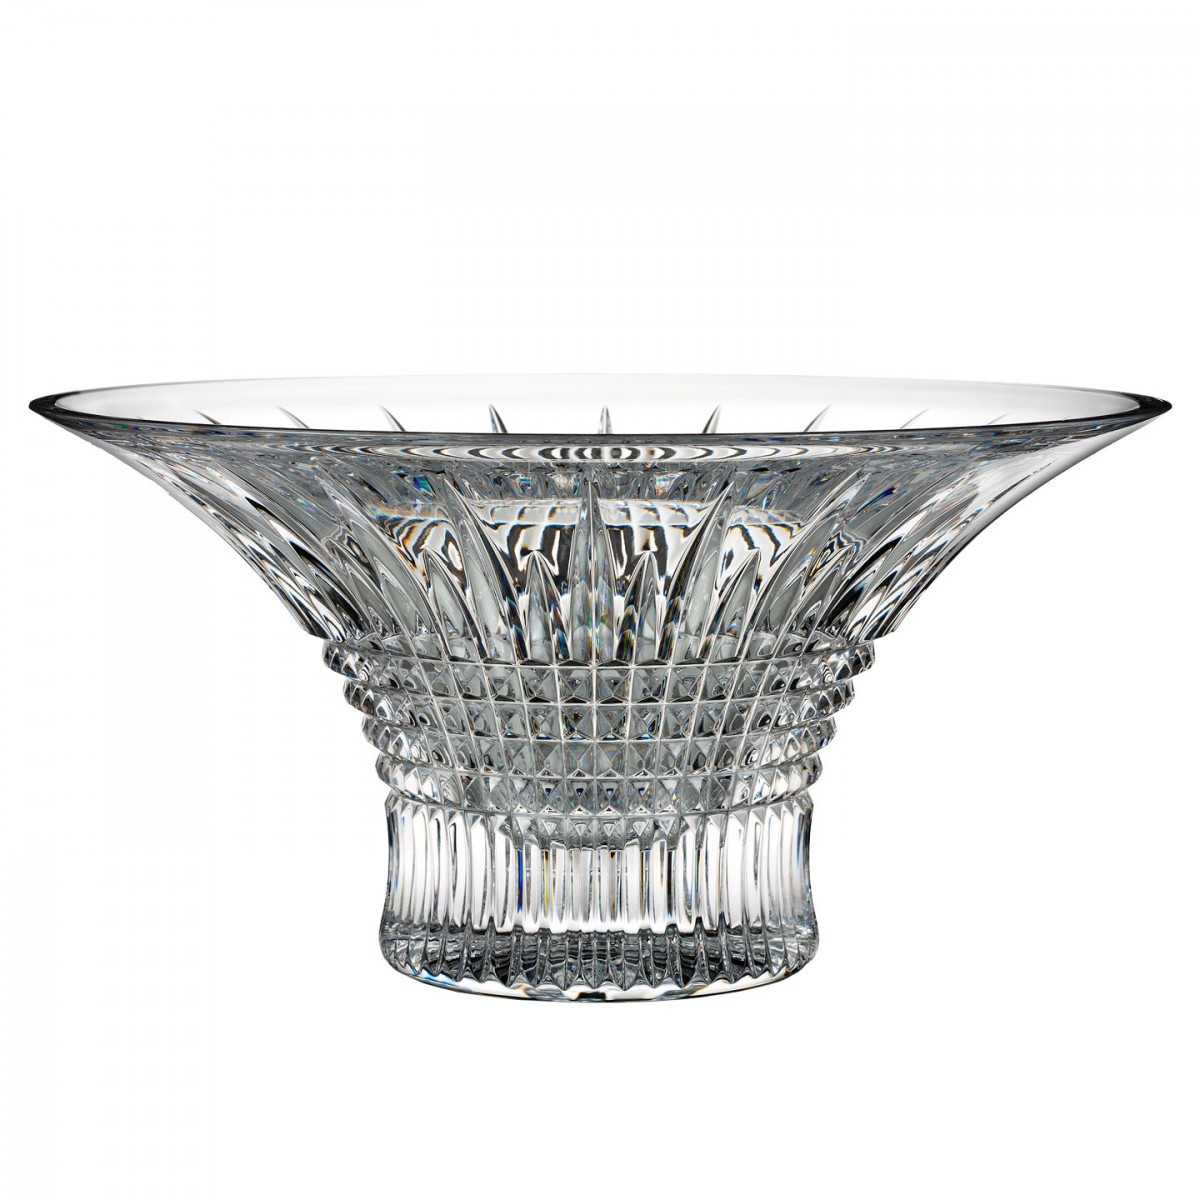 25 Fashionable Retired Waterford Crystal Vase Patterns 2022 free download retired waterford crystal vase patterns of lismore diamond 12in bowl discontinued house of waterford throughout lismore diamond 12in bowl discontinued